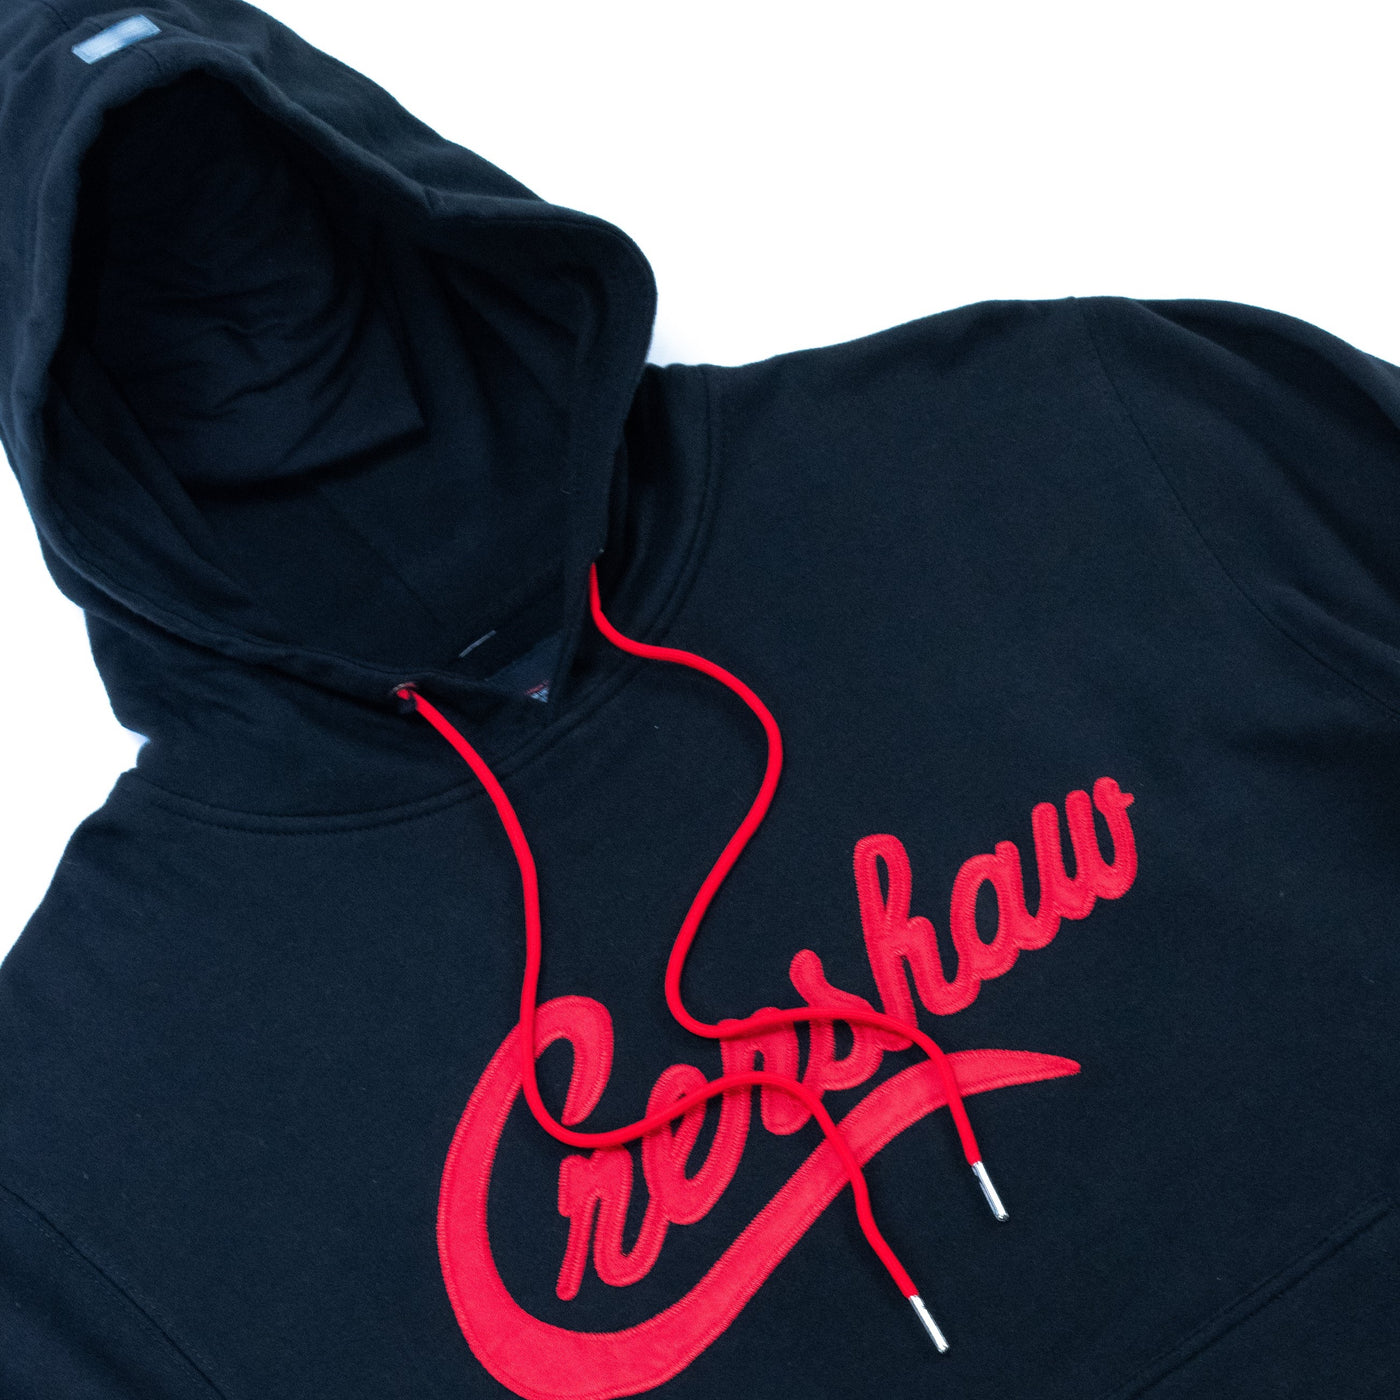 Limited Edition Crenshaw Hoodie - Black/Red Detail 1